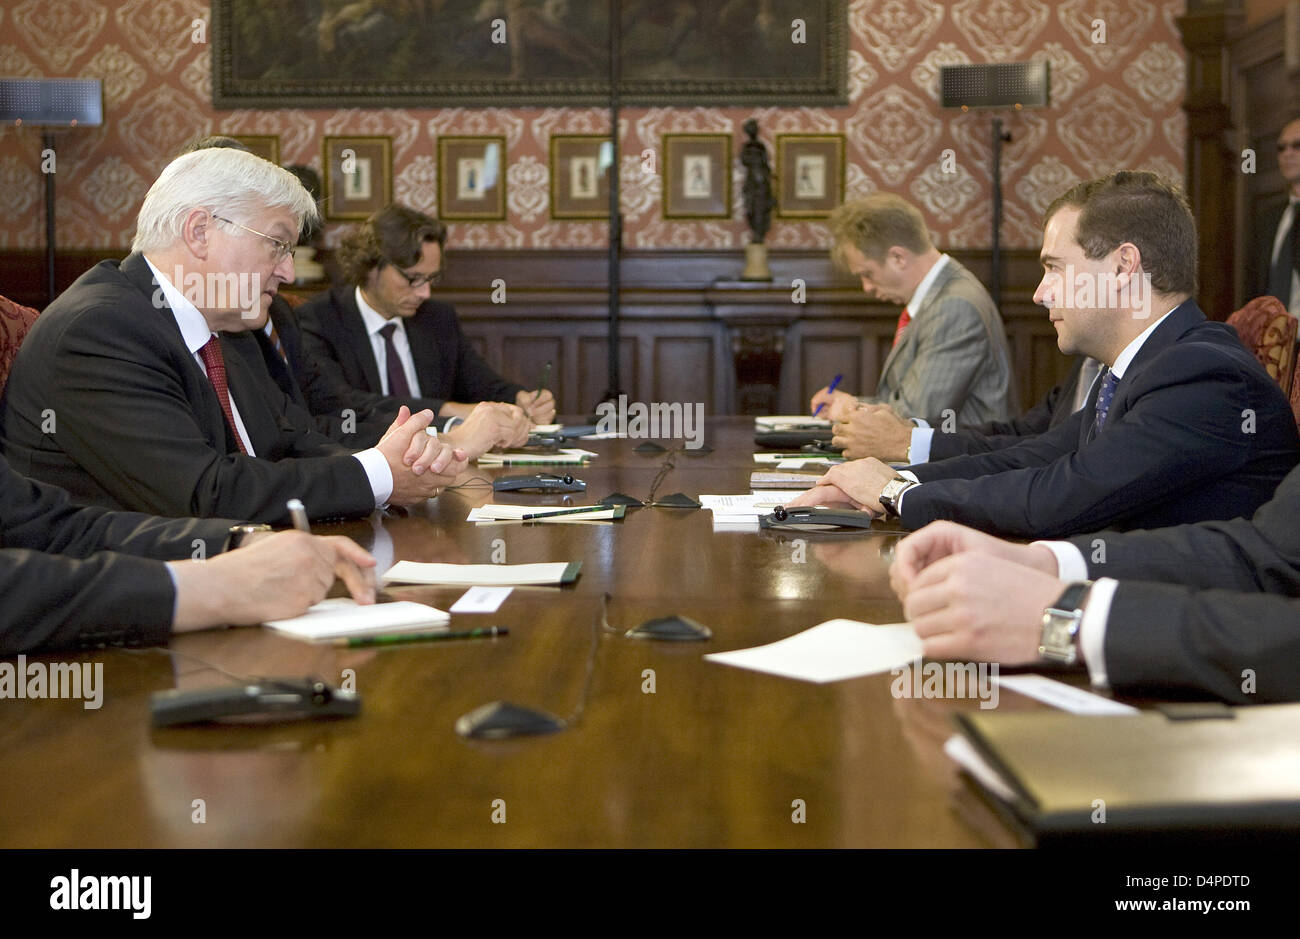 Russia?s President Dmitry Medvedev (R) meets German Foreign Minister Frank-Walter Steinmeier (L) for talks at Meiendorf Castle in Barvikha near Moscow, Russia, 10 June 2009. Steinmeier will also meet Russia?s Prime Minister Putin and his counterpart Lavrov during his one-day visit to Russia. Photo: ARNO BURGI Stock Photo